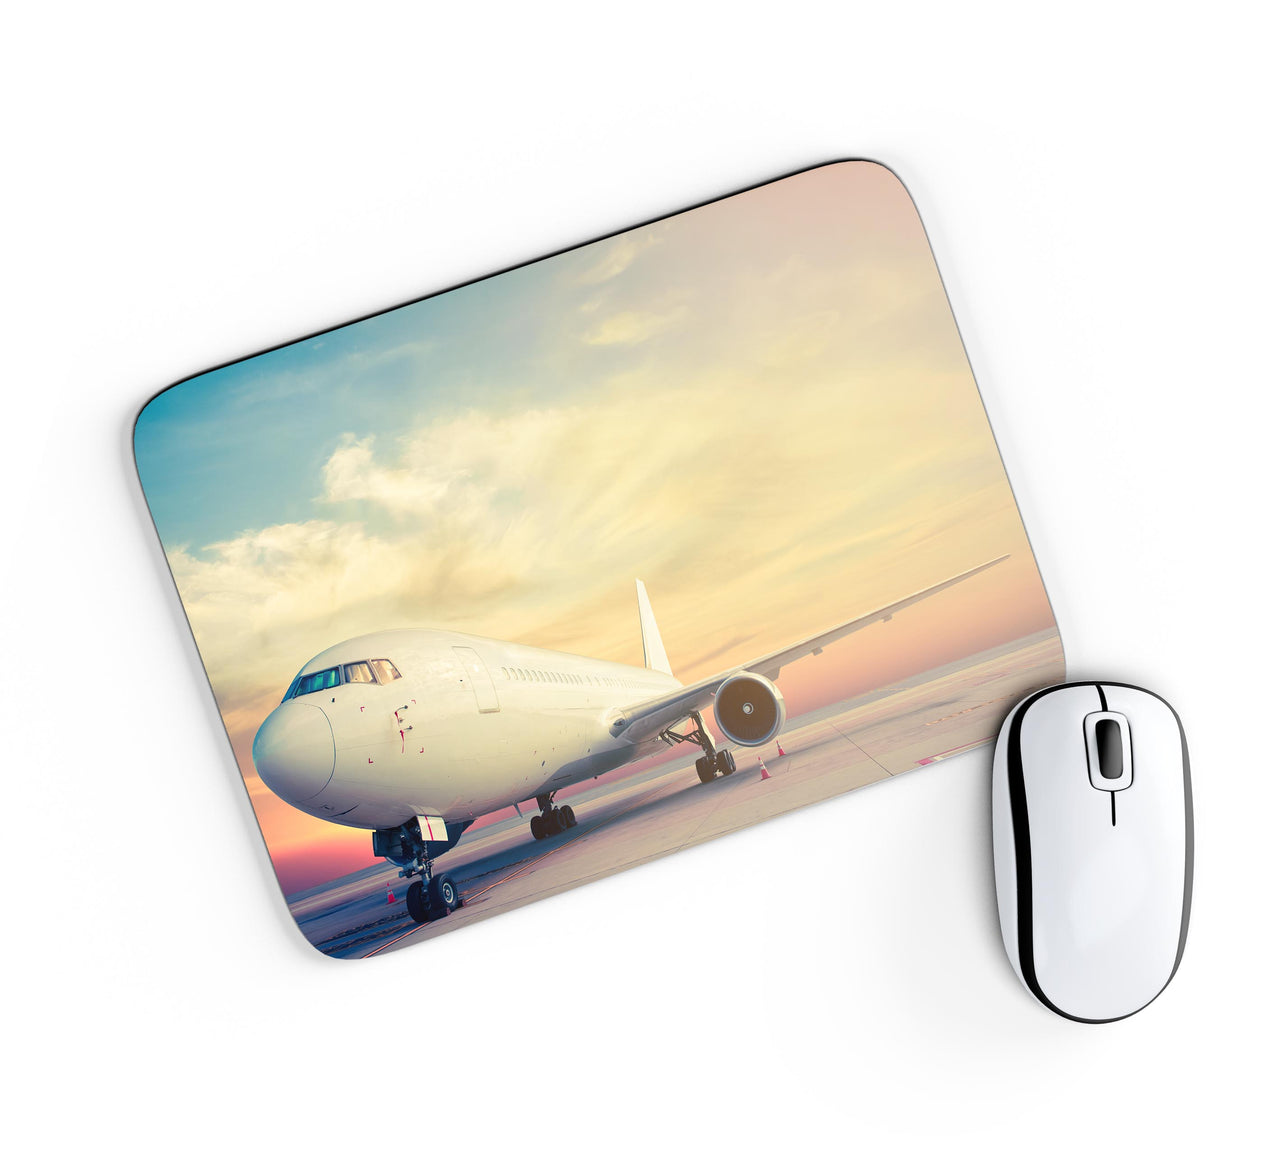 Parked Aircraft During Sunset Designed Mouse Pads